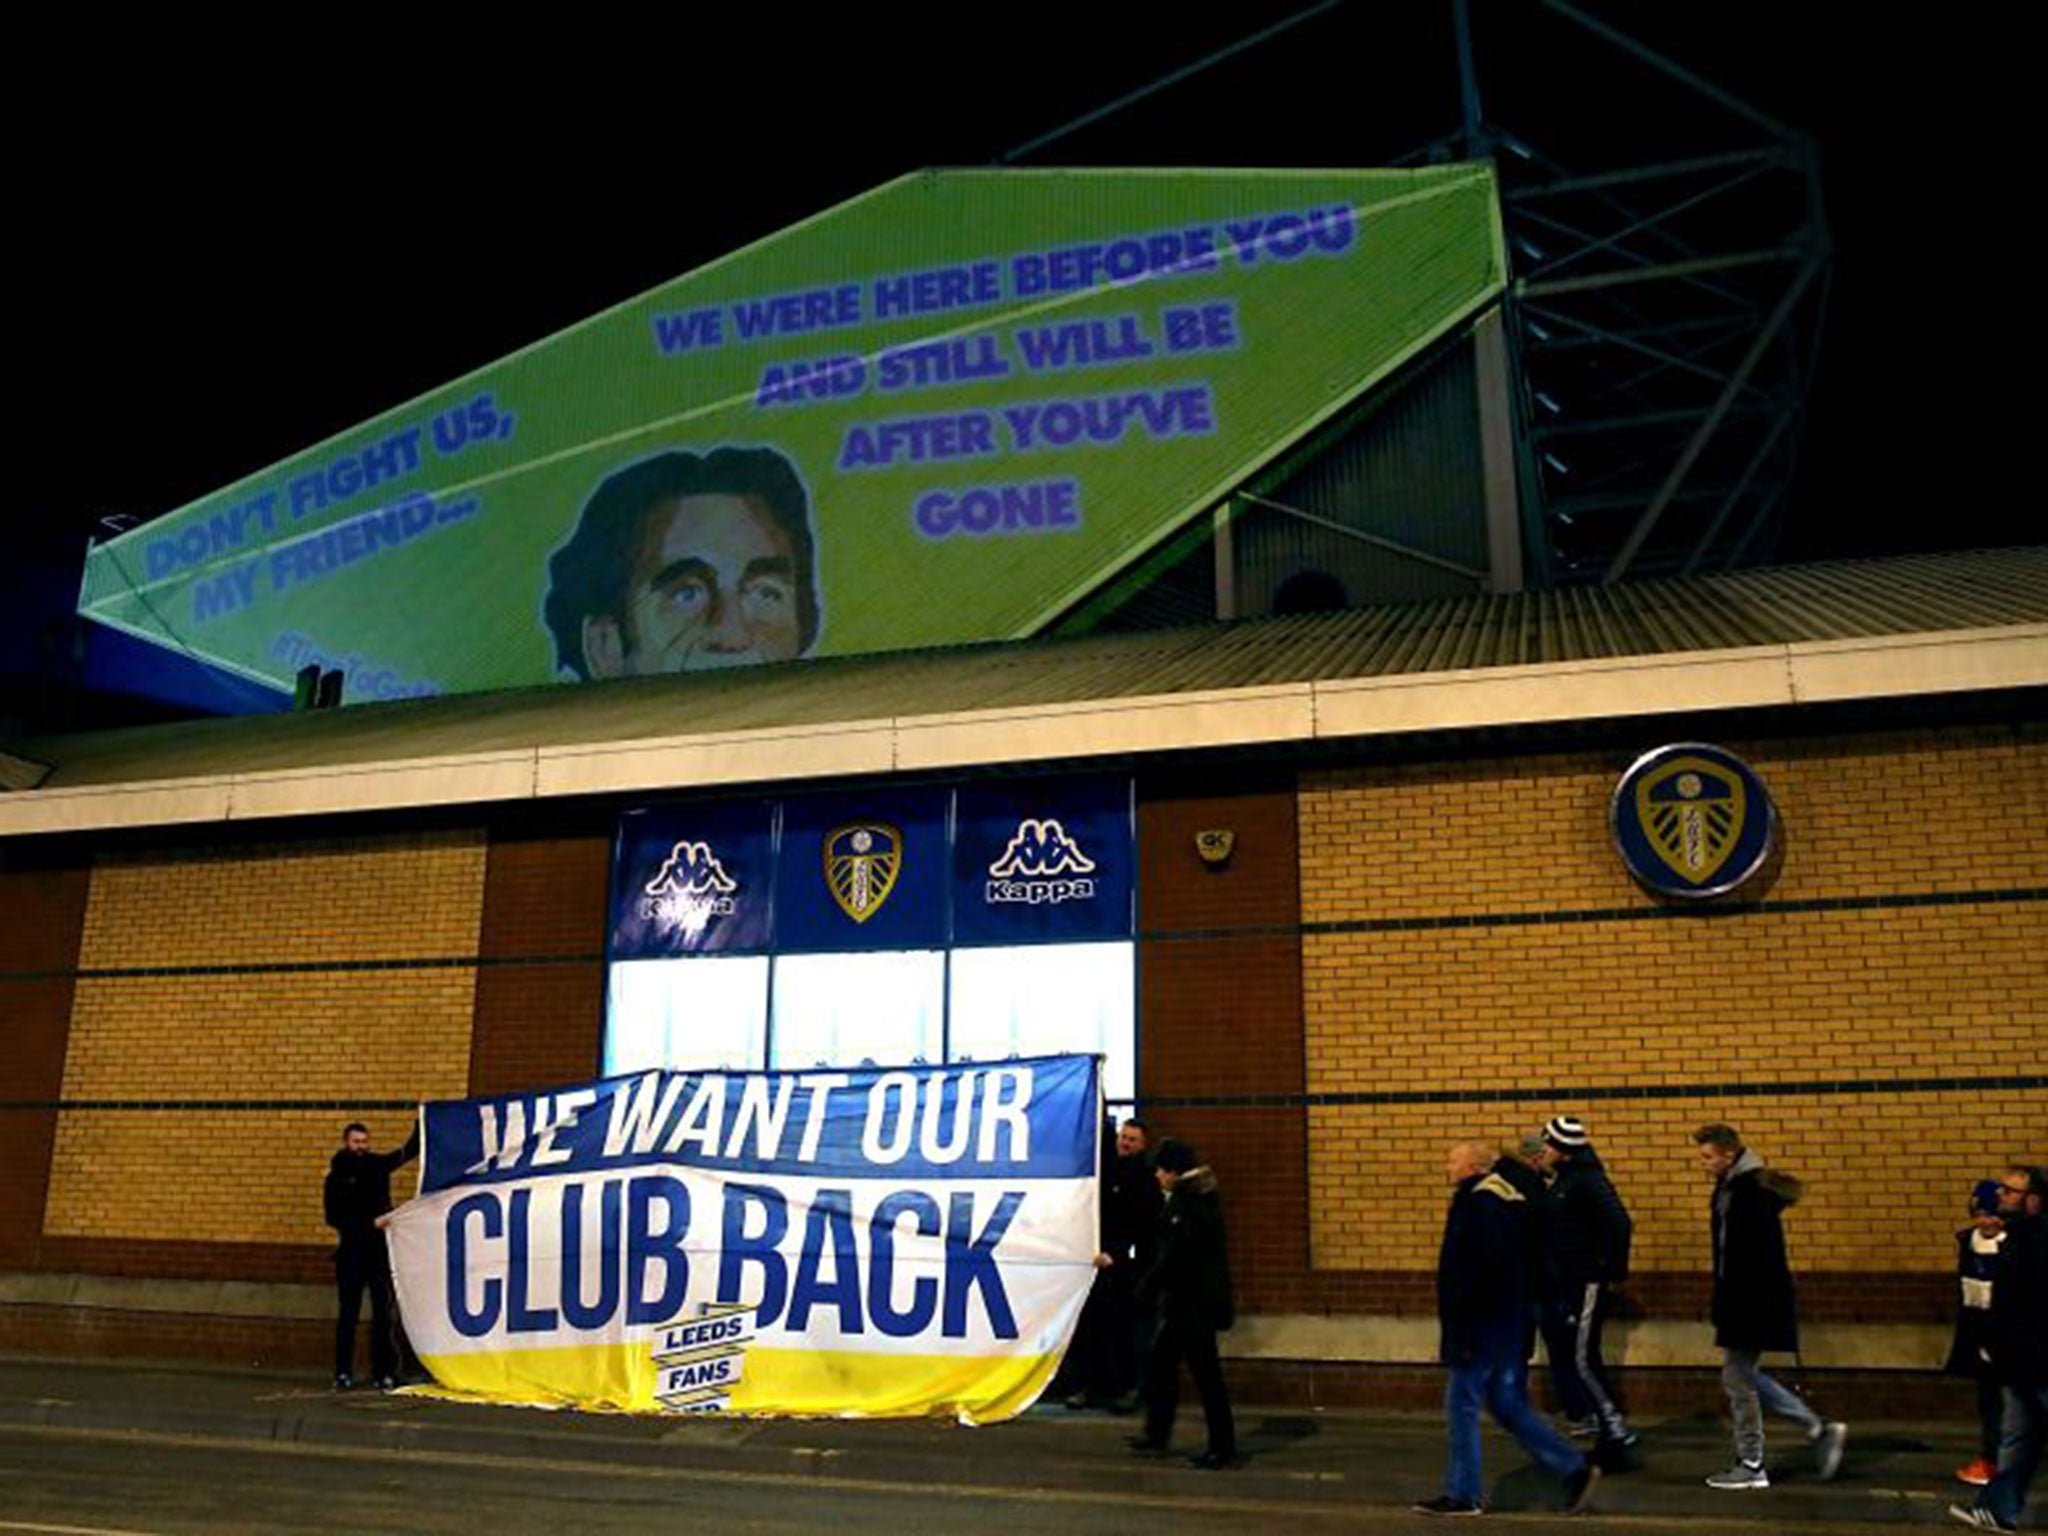 Projections and a banner, in protest against Leeds owner Massimo Cellino, are seen prior to the match at Elland Road